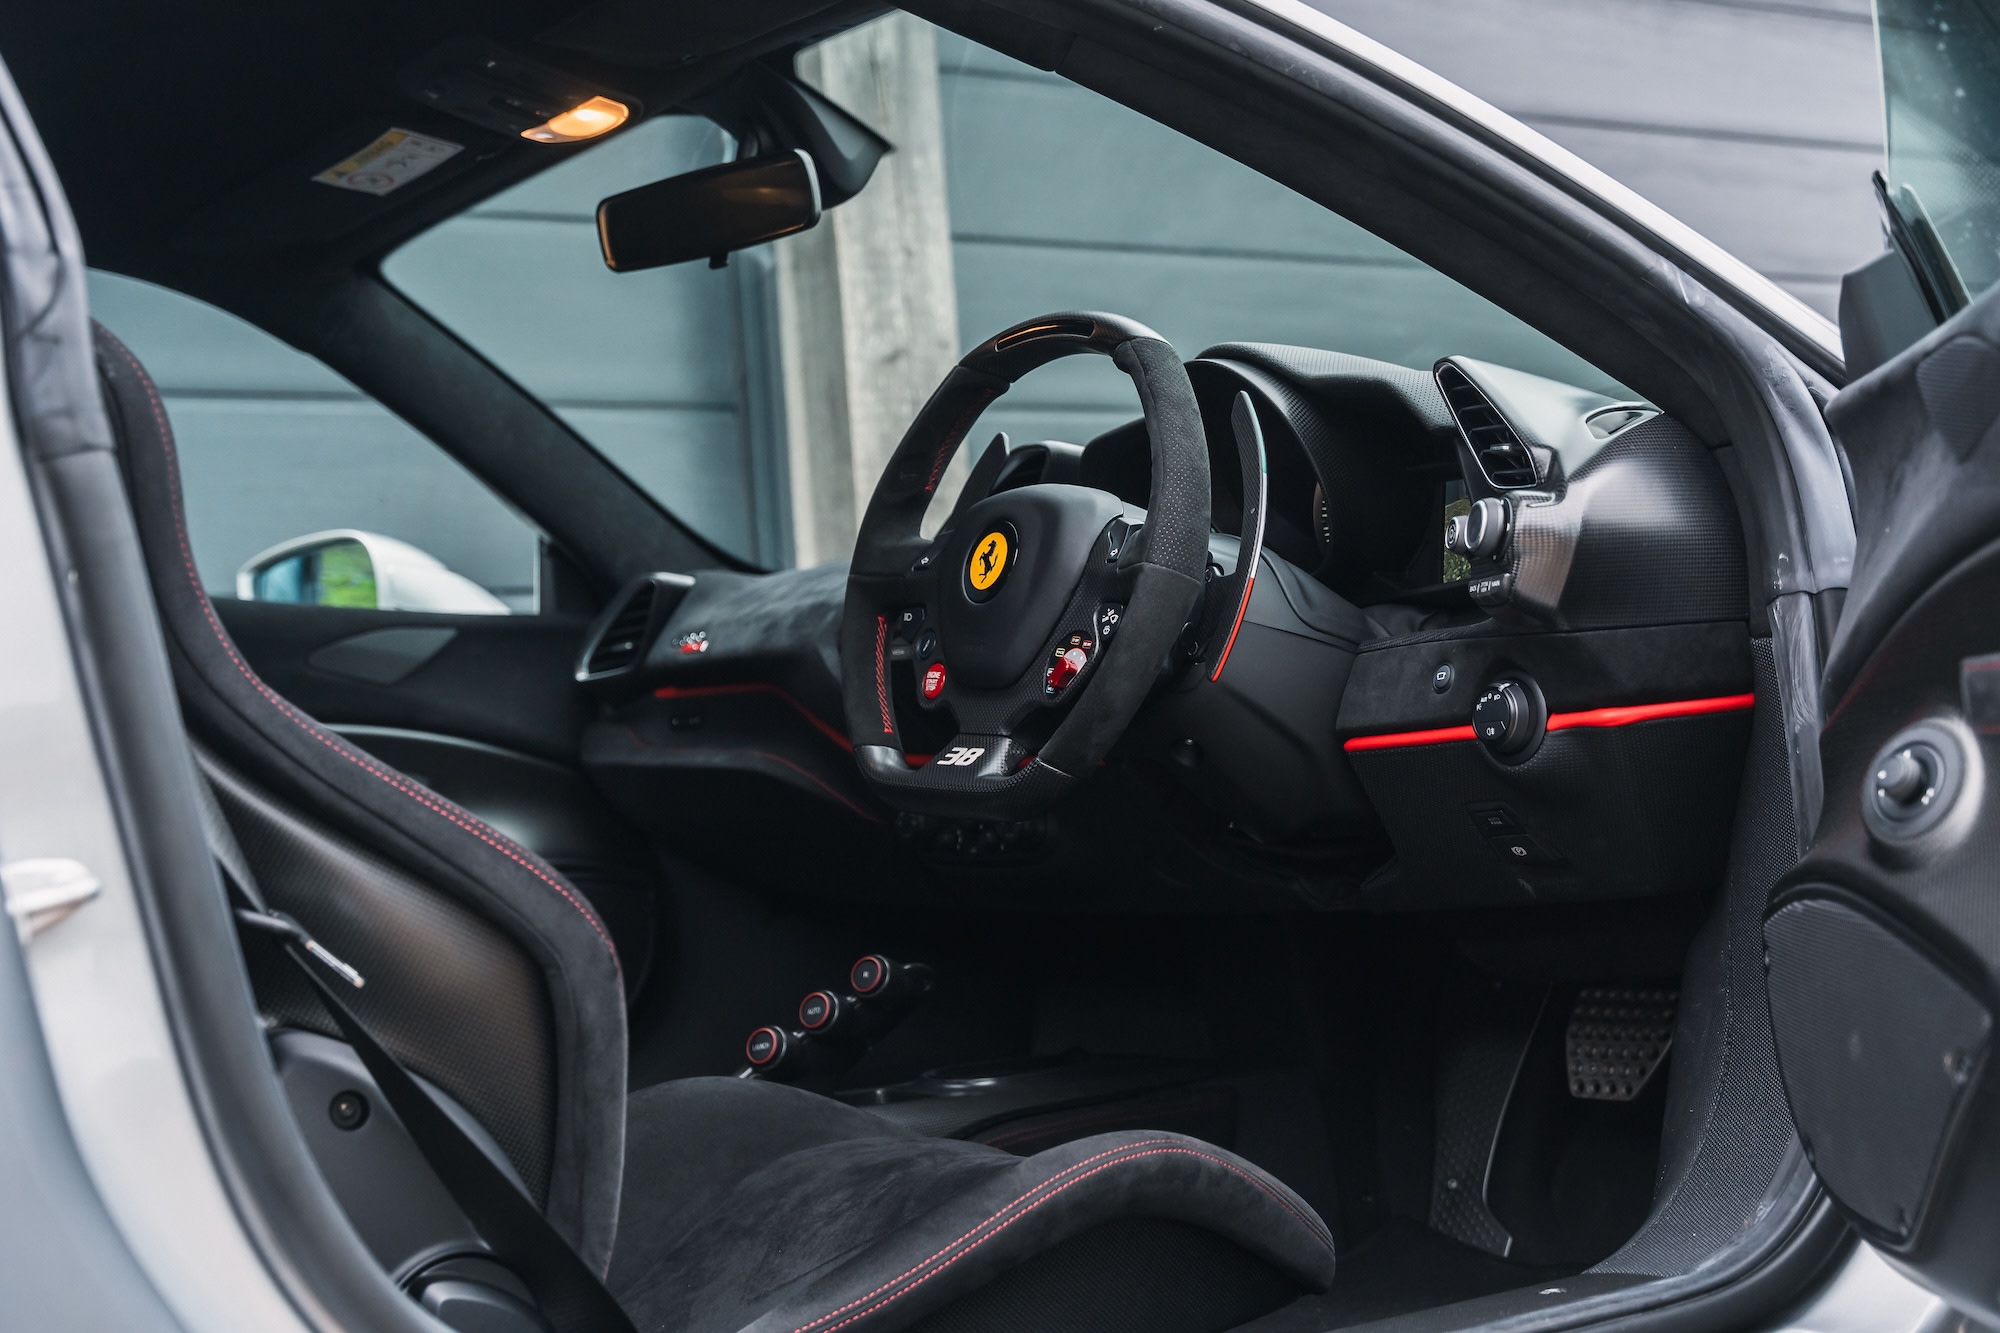 This Ferrari 488 Pista Piloti is a striking limited-edition track-focused modern supercar, with little more than delivery mileage on the odometer. 2